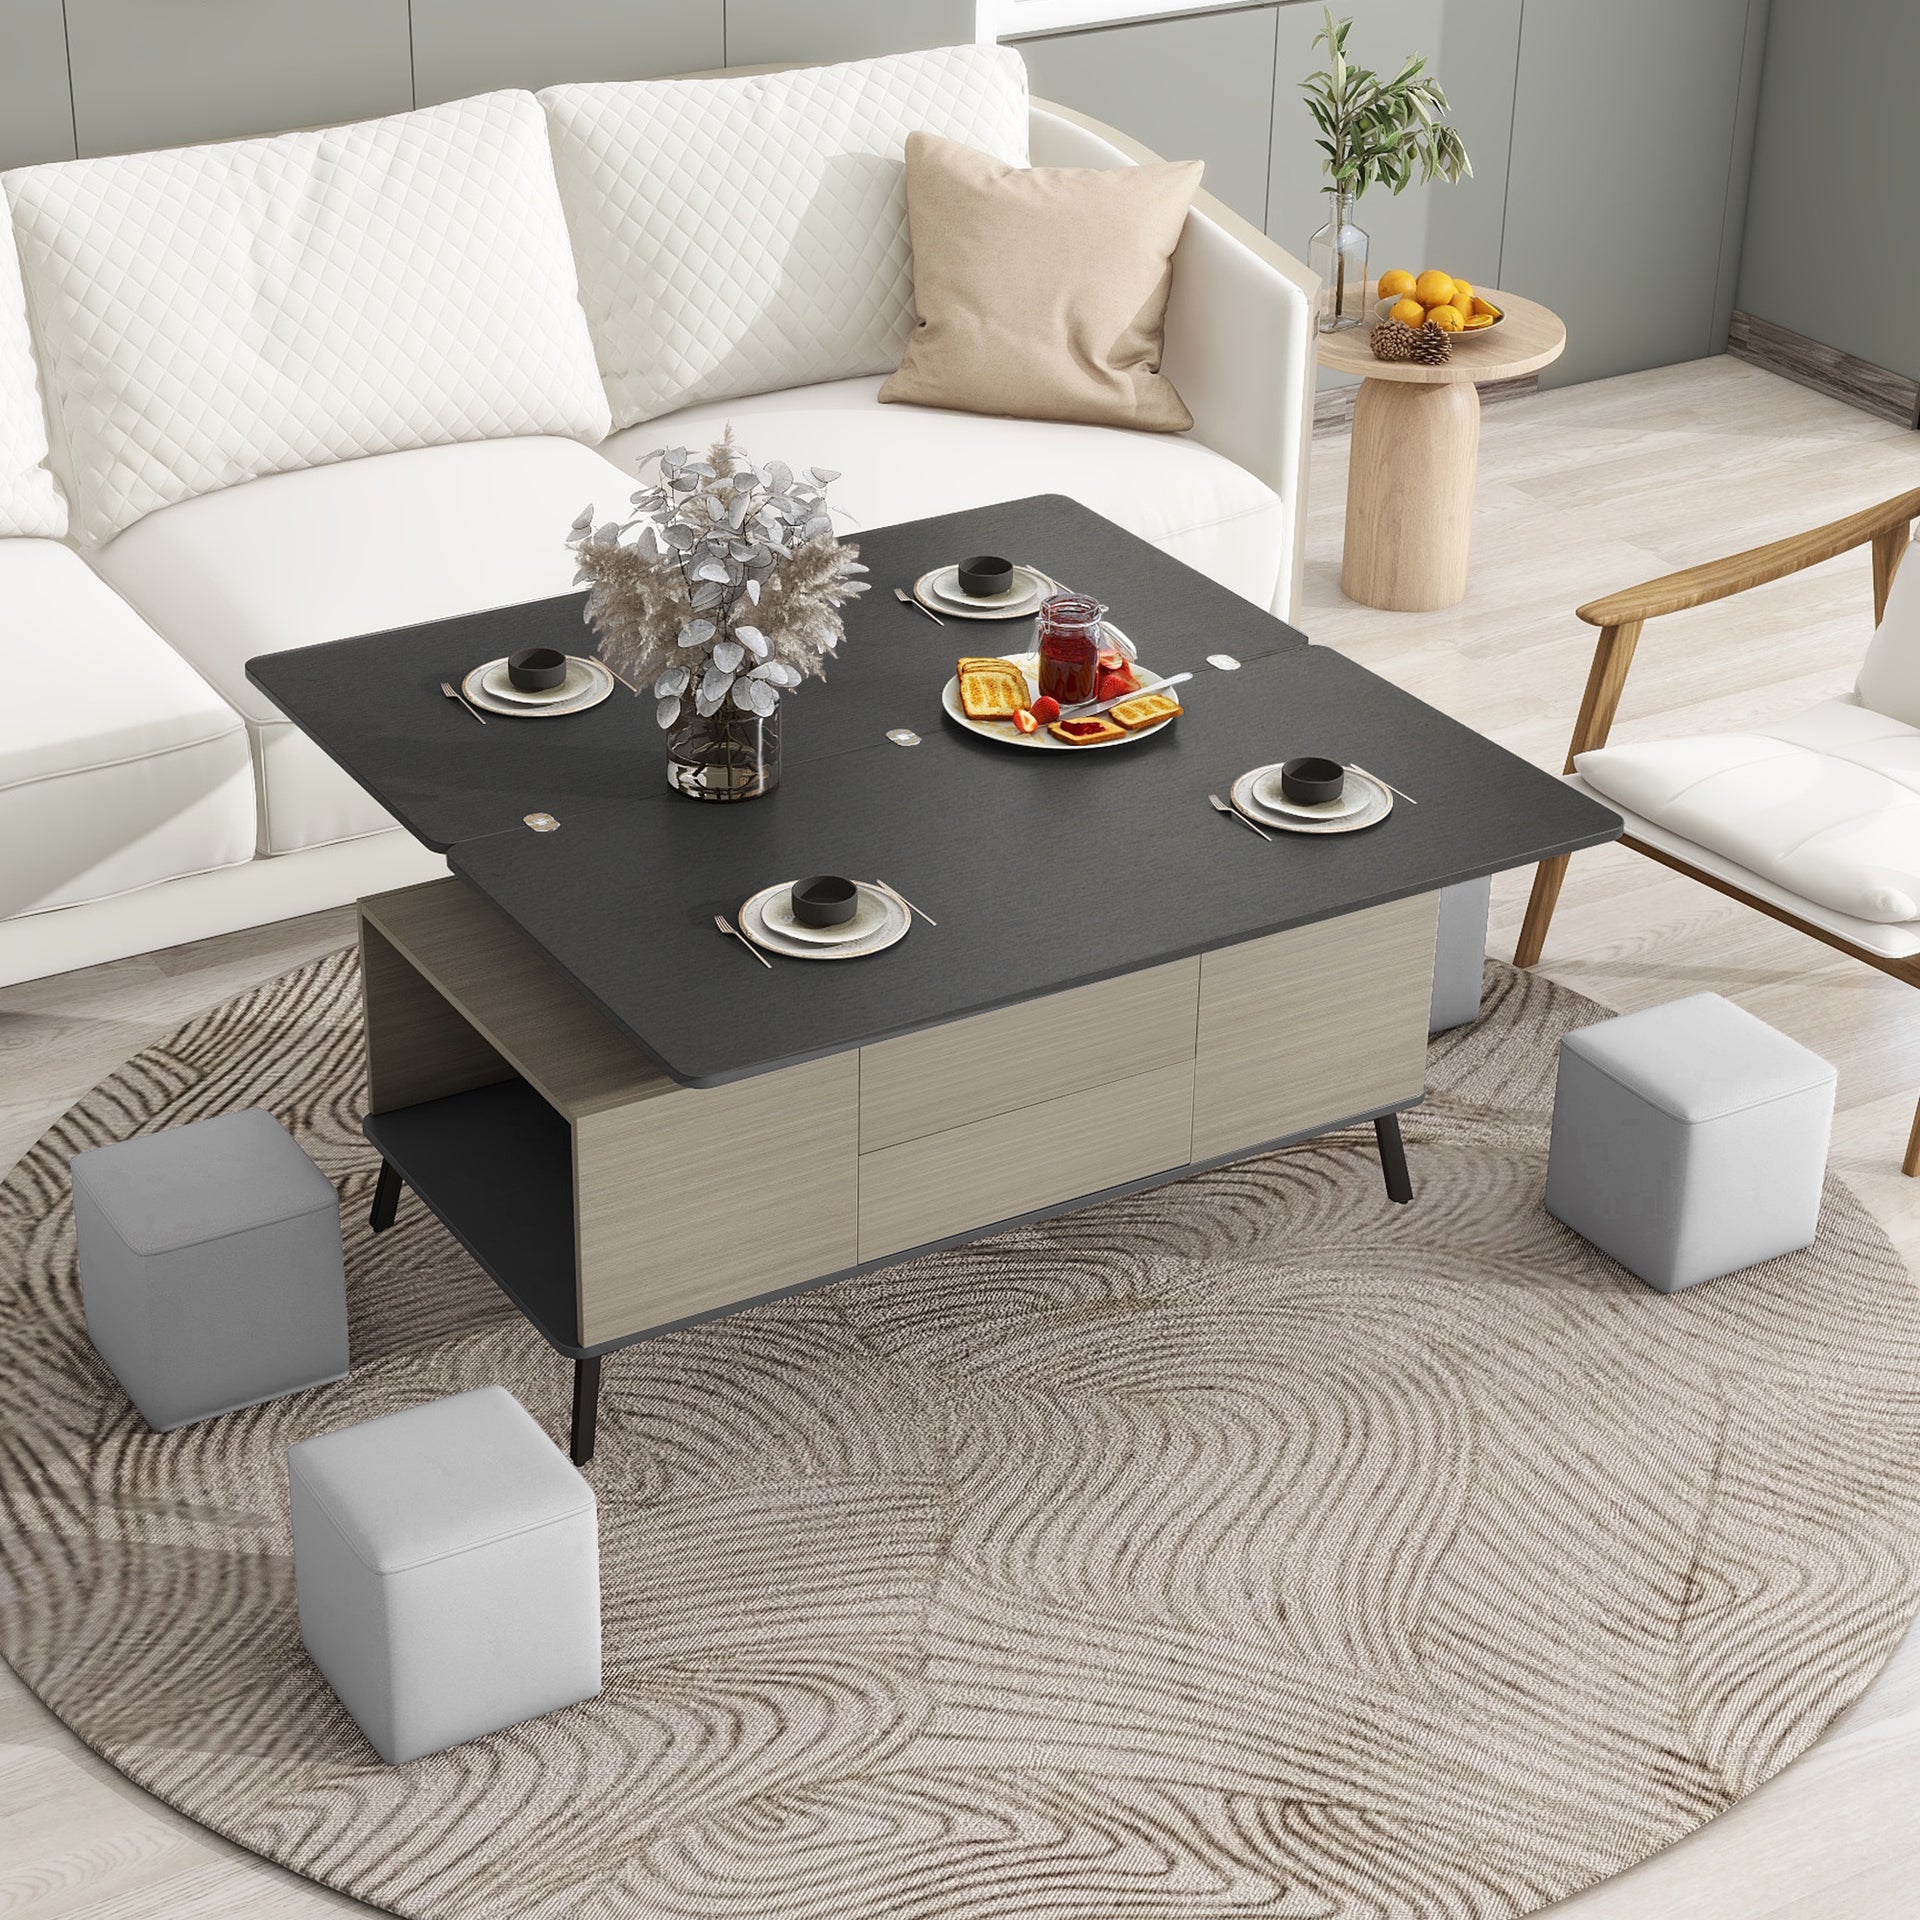 Convertible Lift Top Dining Coffee Table with Storage and Ottoman Seats